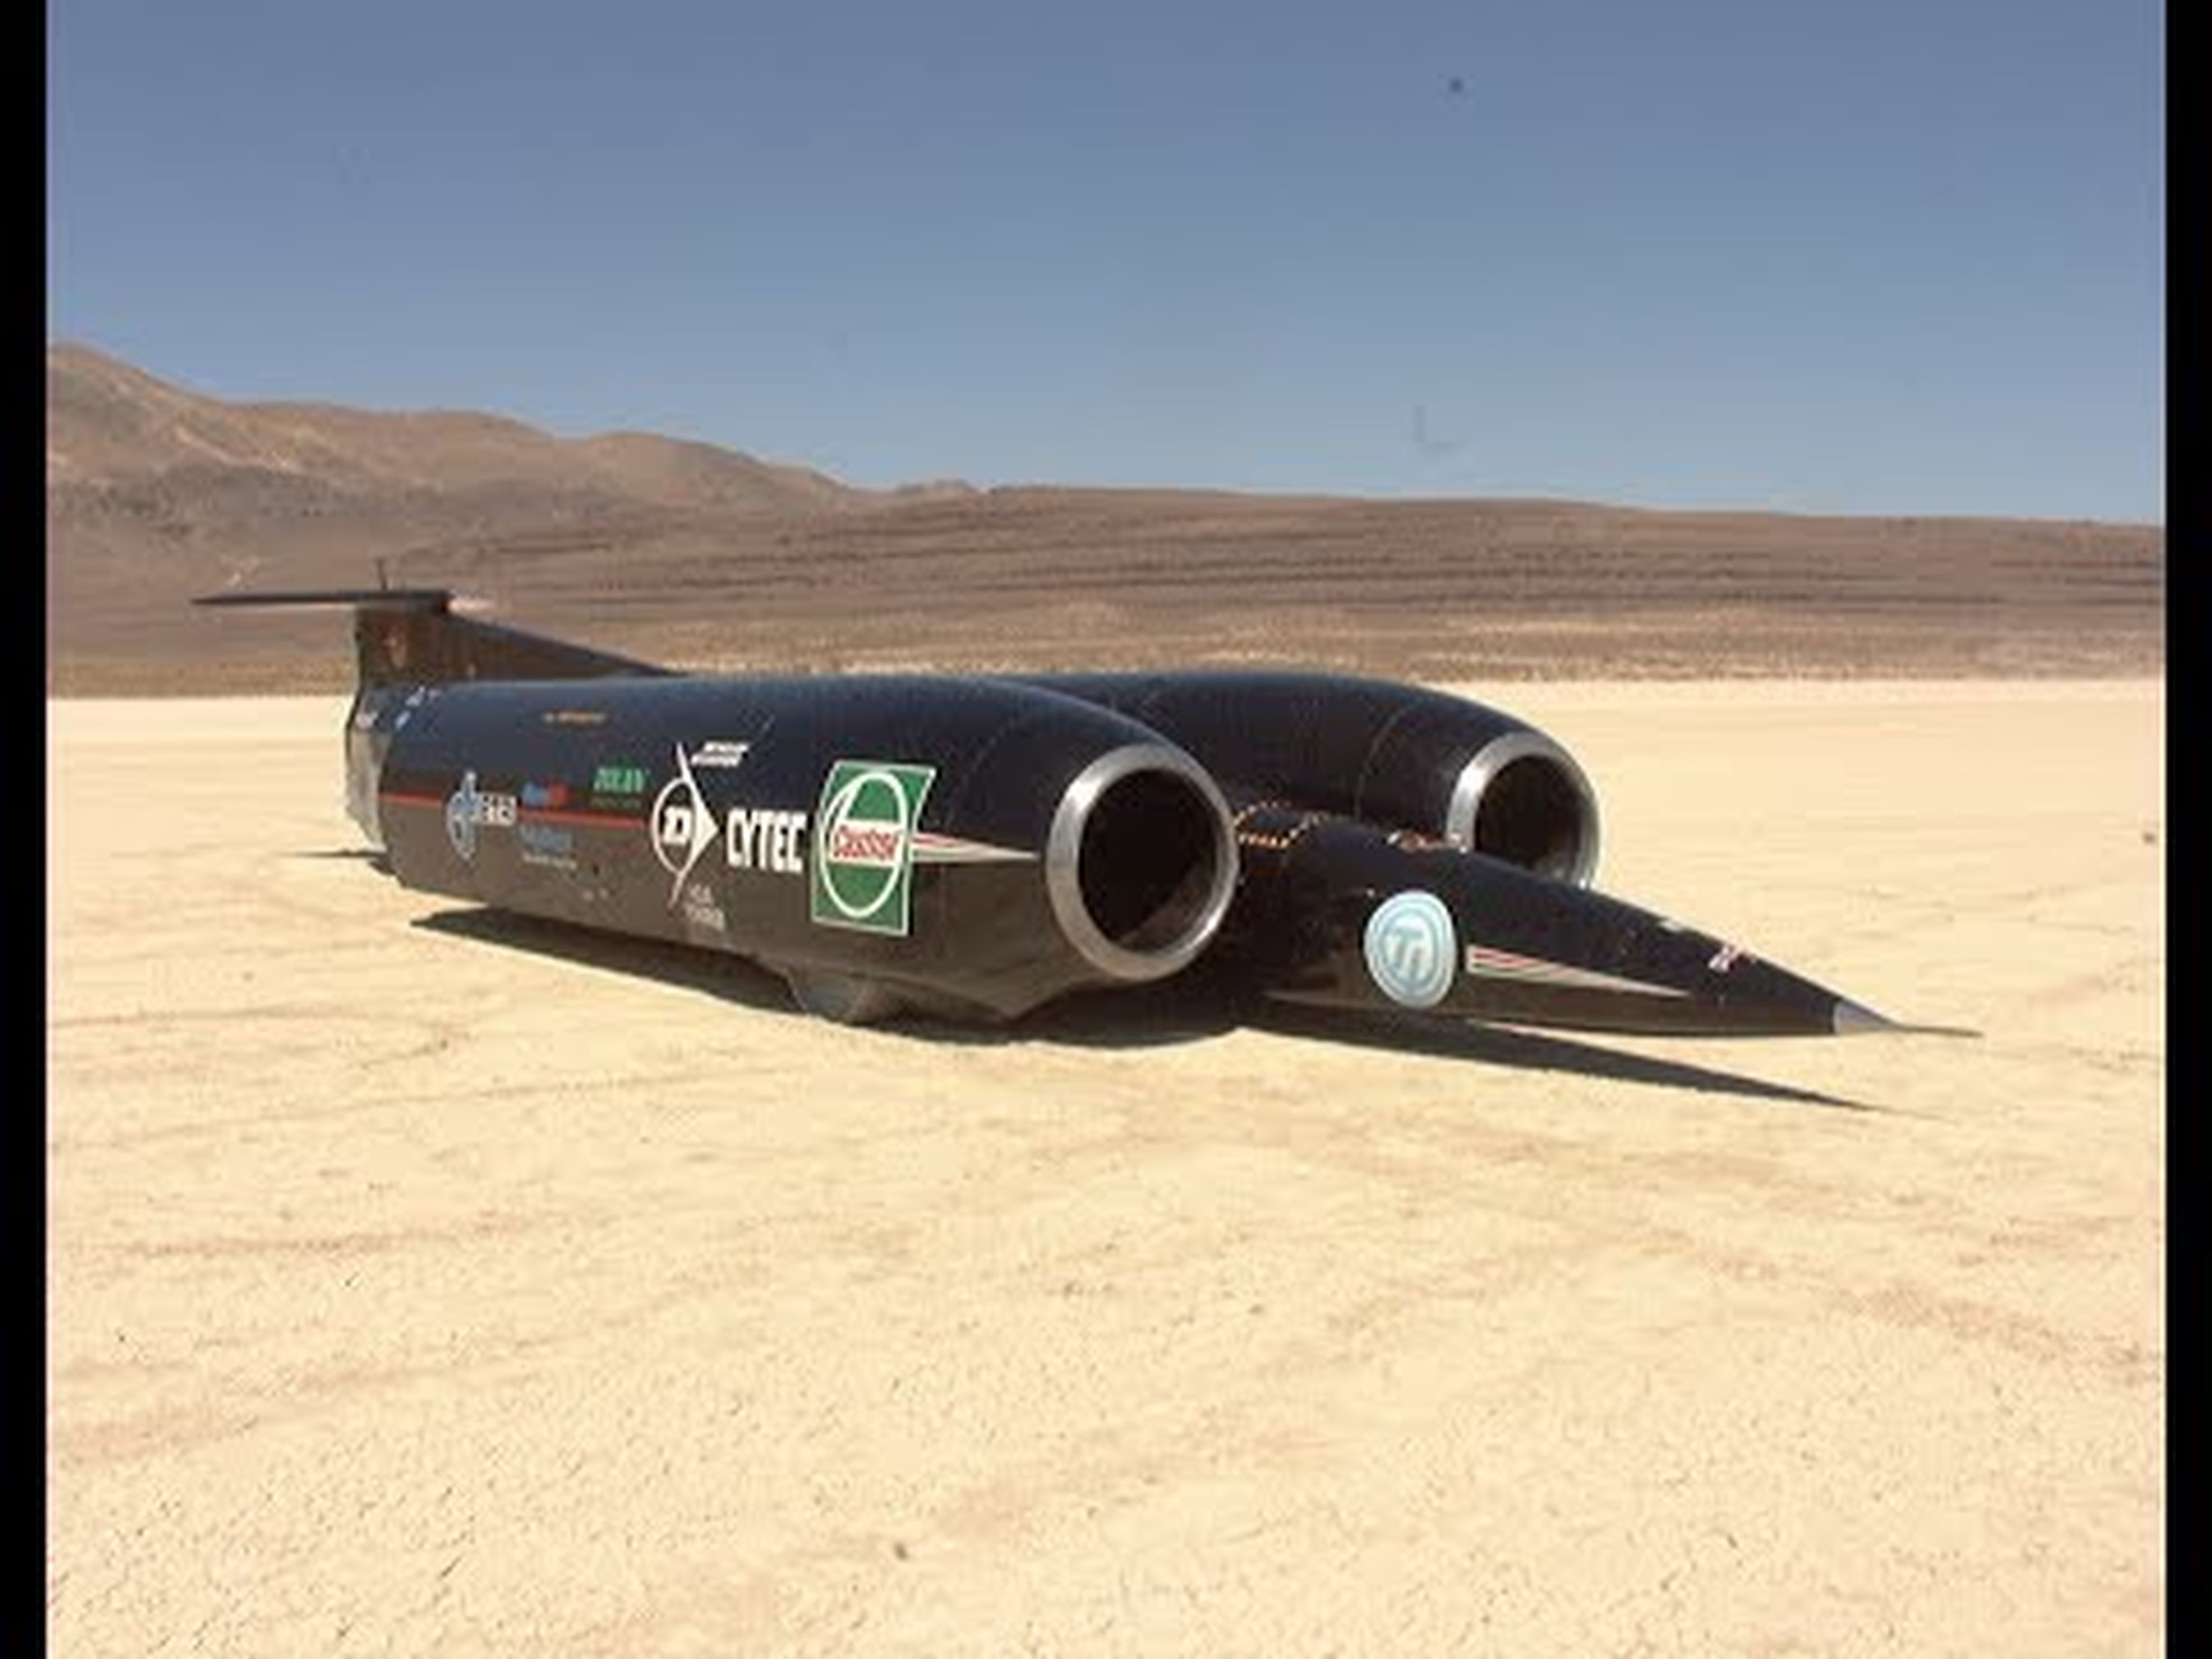 Thrust SSC - still the only car to travel faster than the speed of sound